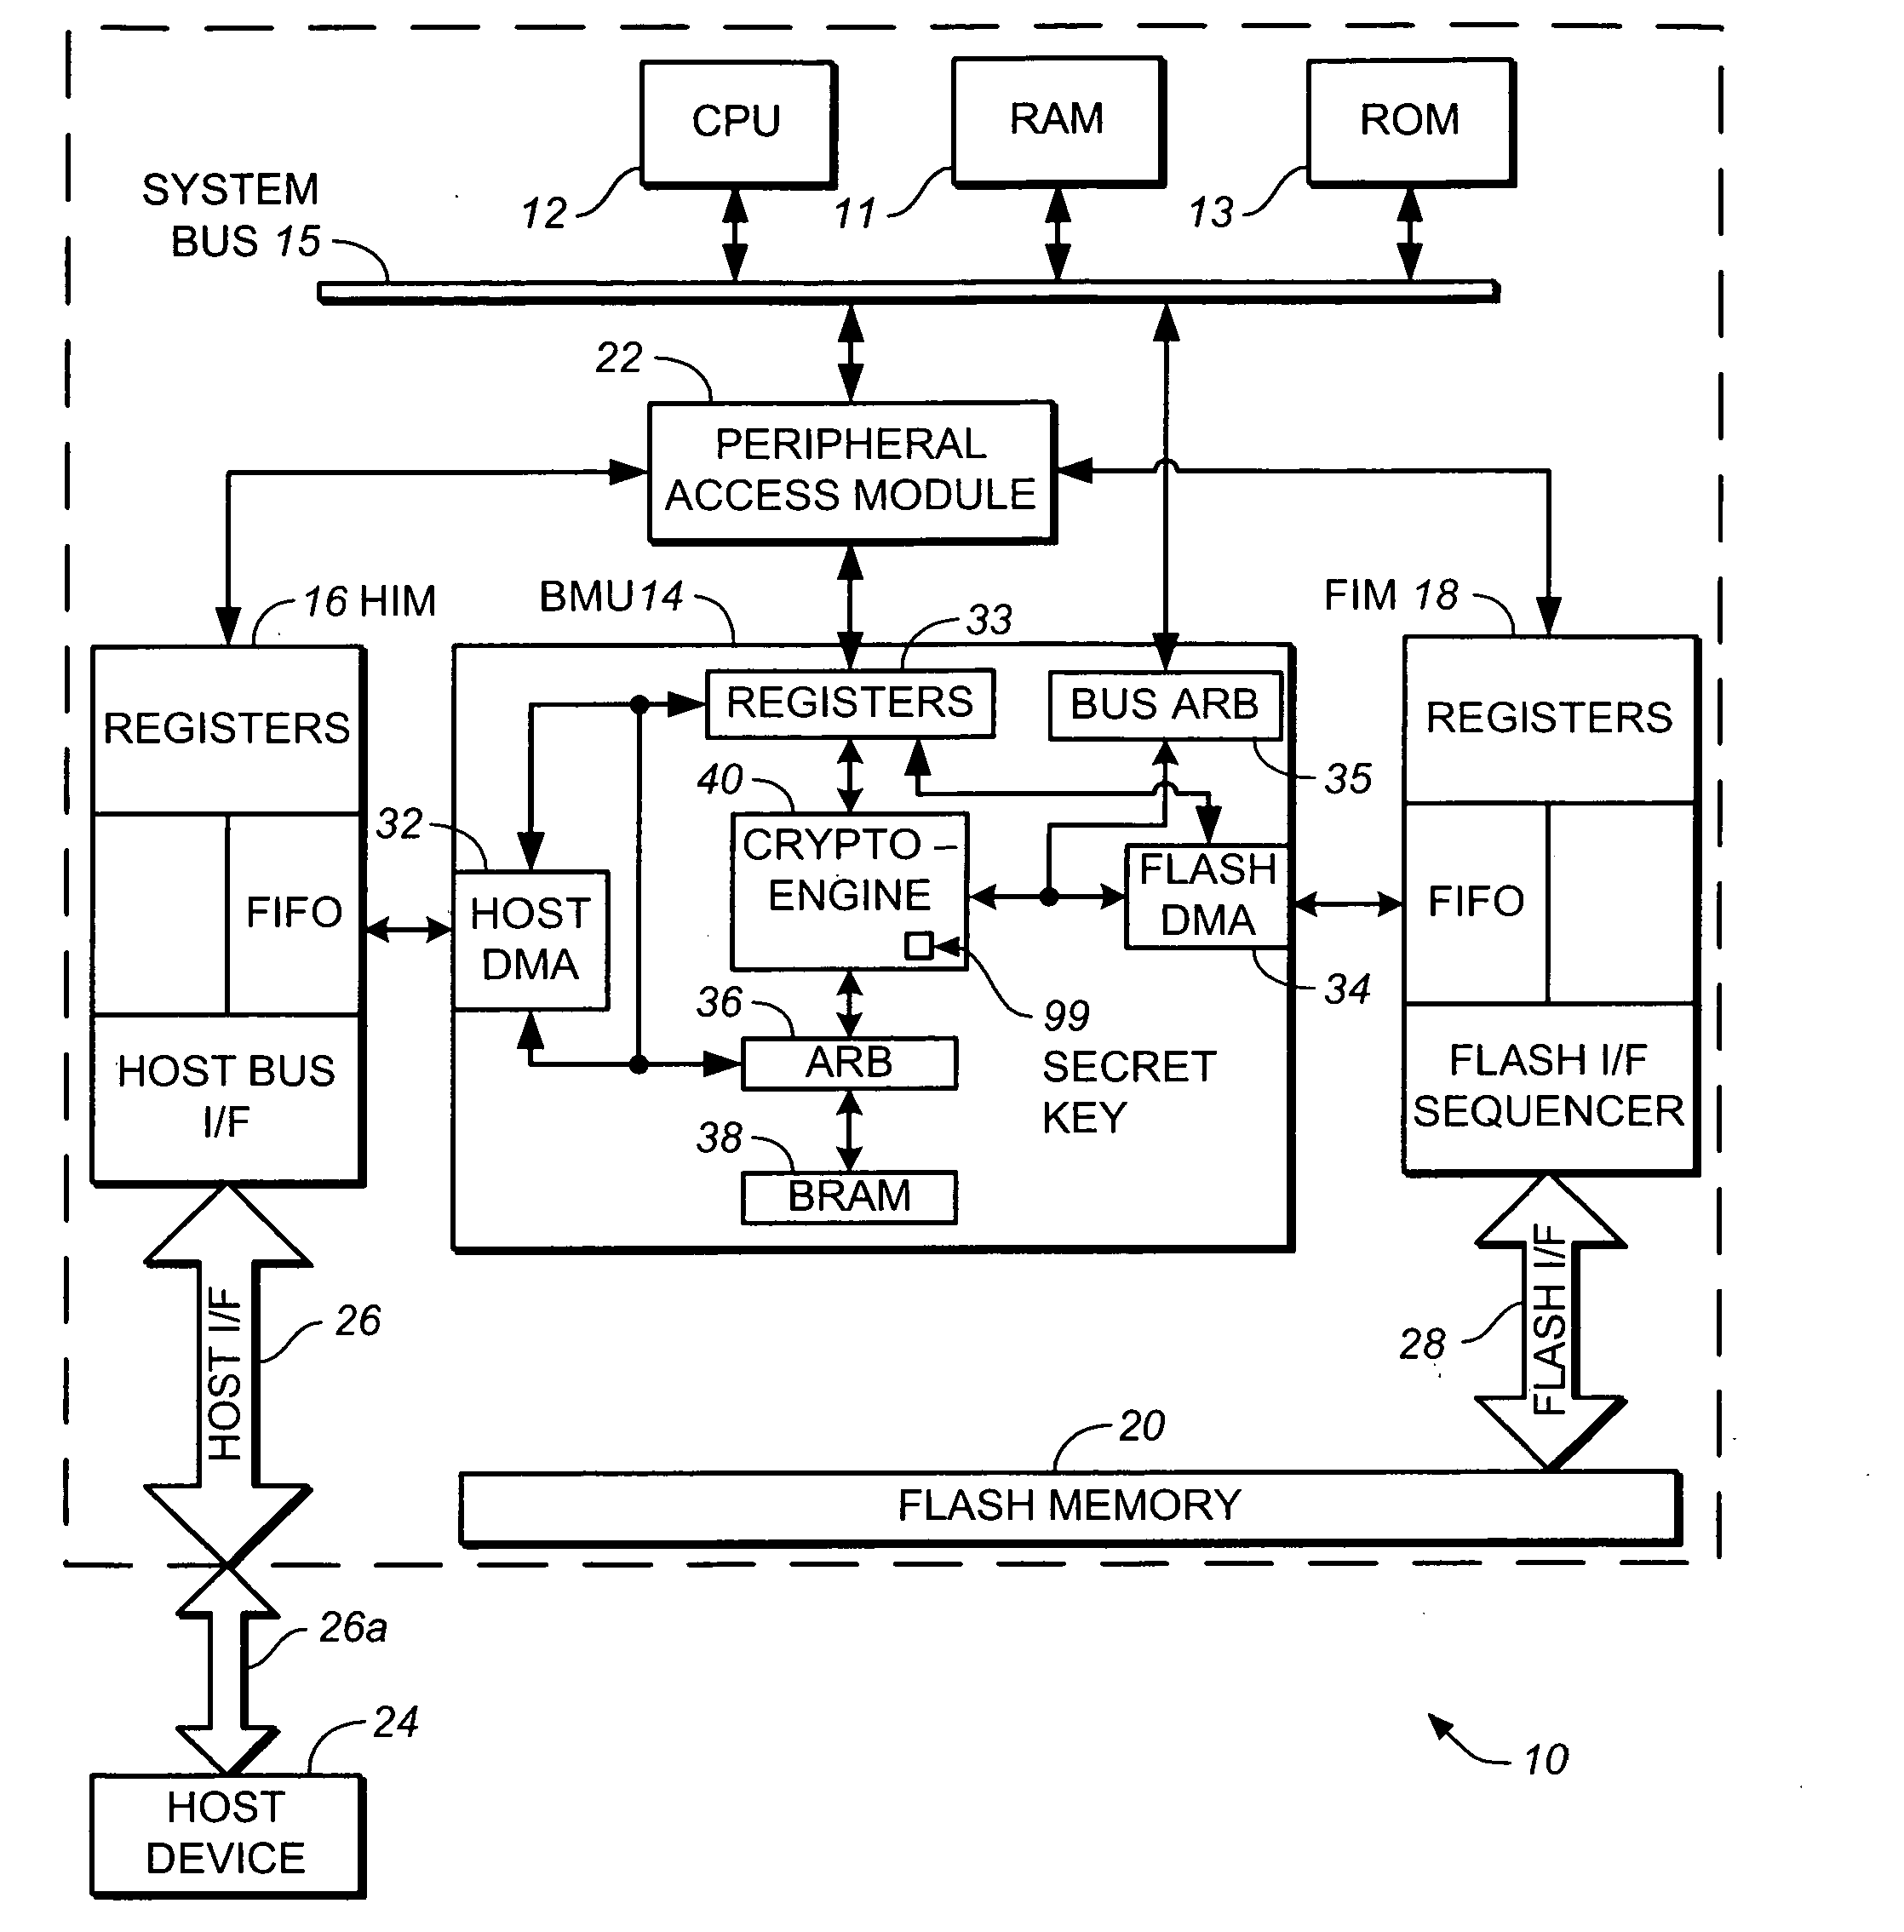 Methods used in a secure memory card with life cycle phases